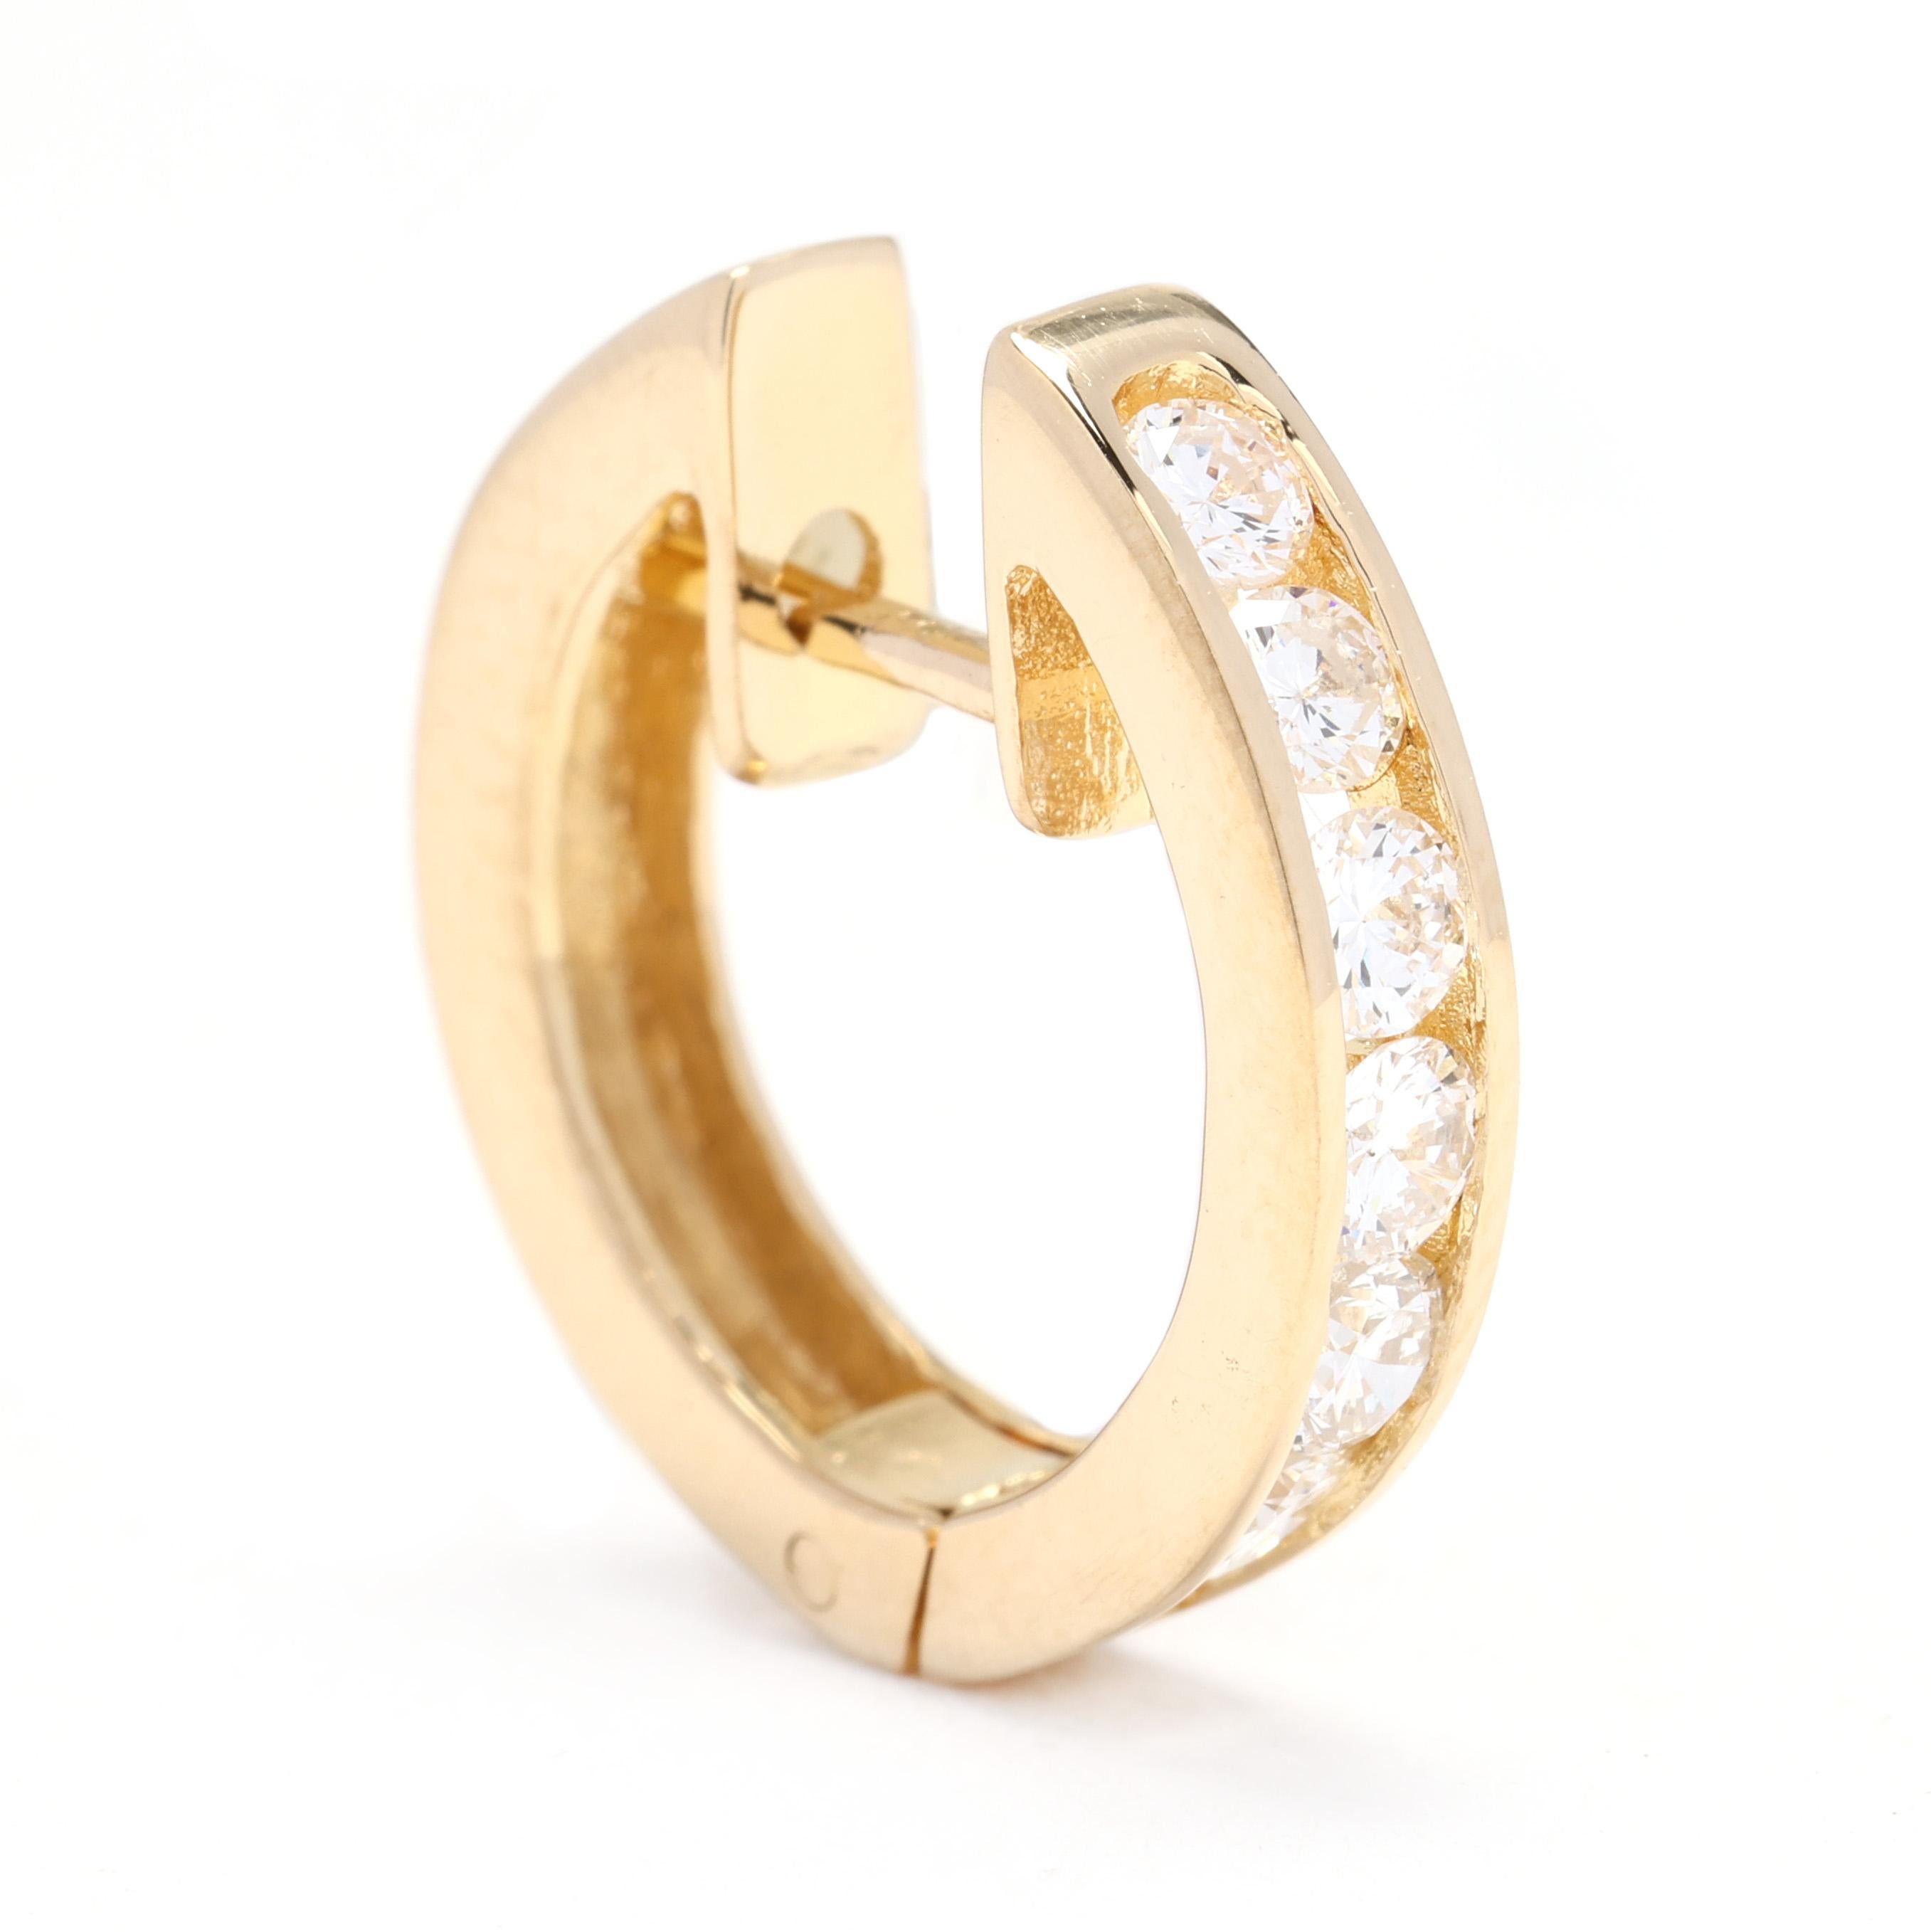 These beautiful 18k yellow gold hoop earrings are adorned with a total carat weight of 0.75 diamonds. The diamonds are expertly prong-set along the front of the hoops, creating a stunning display of sparkle and brilliance. With a huggie style, these